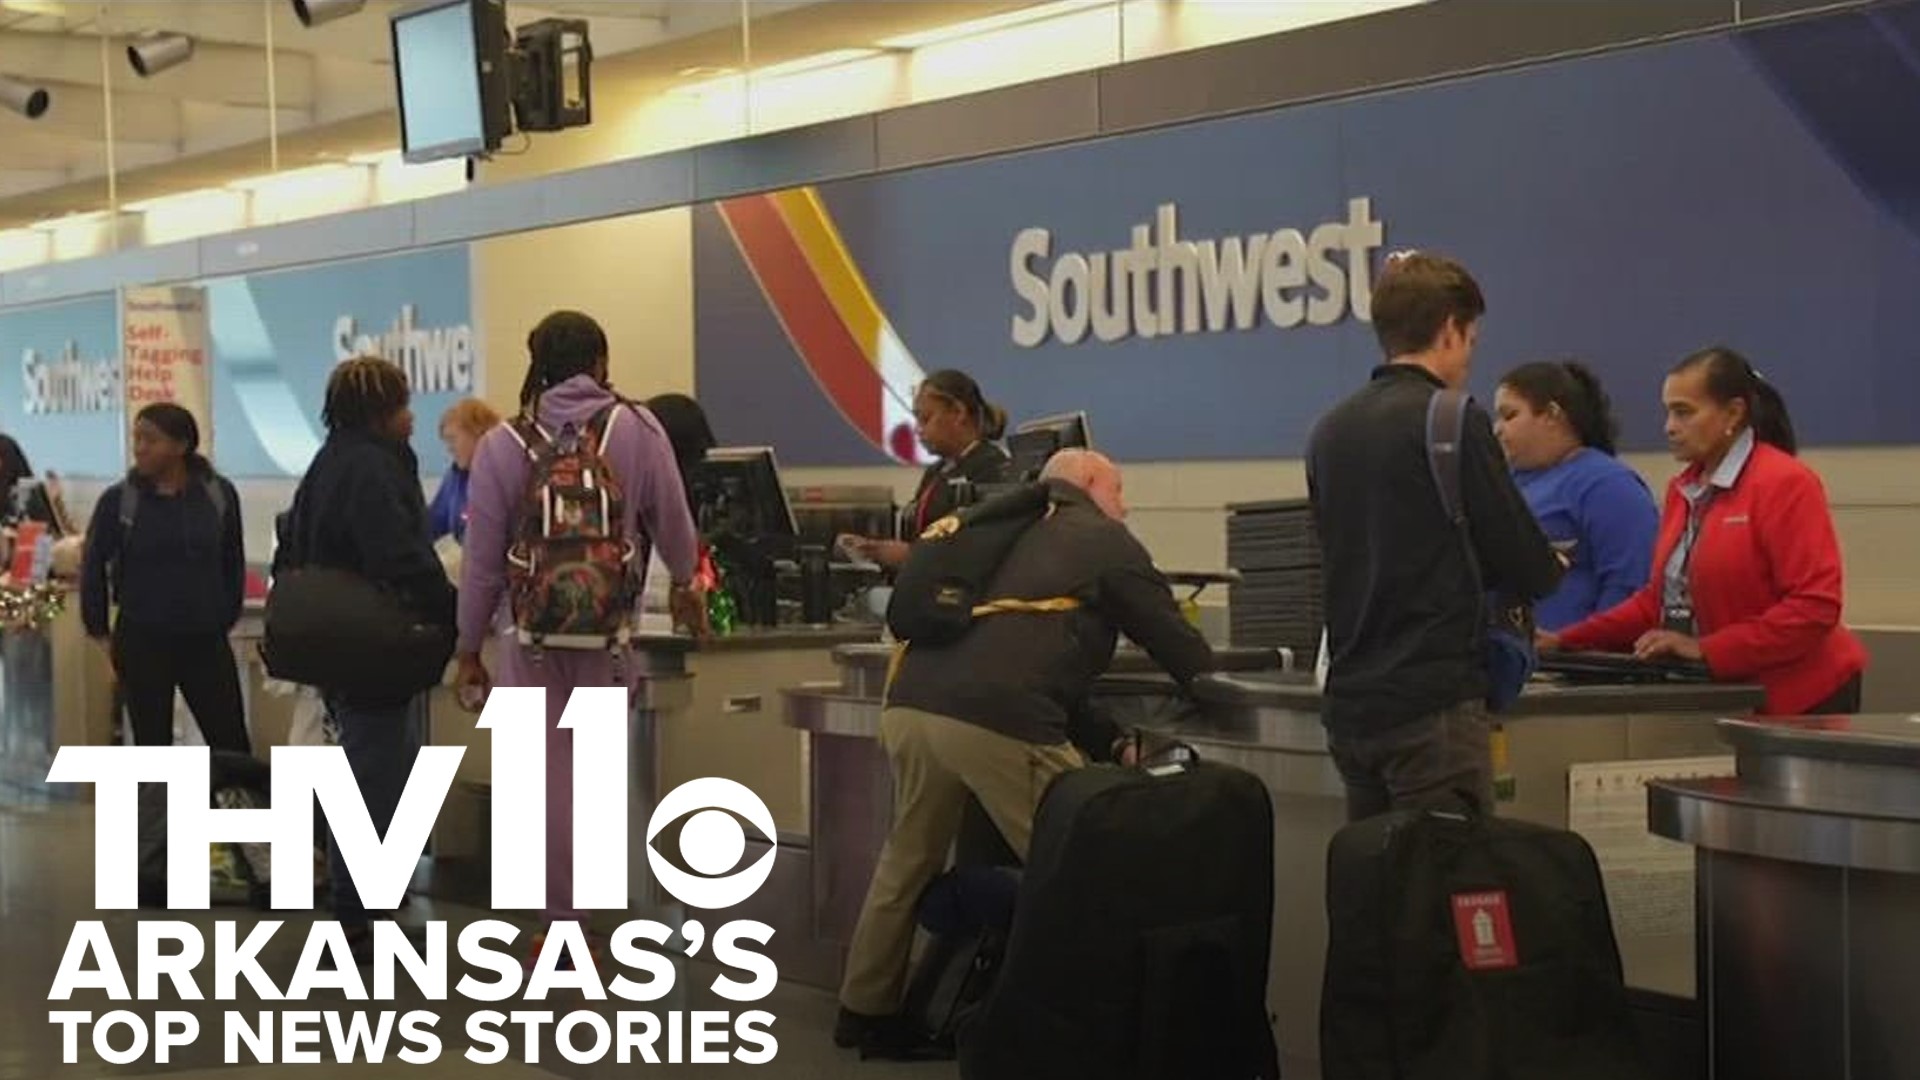 Sarah Horbacewicz delivers Arkansas's top news stories for January 8, 2023, including how Southwest Airlines has been dealing with a flight operations disaster.